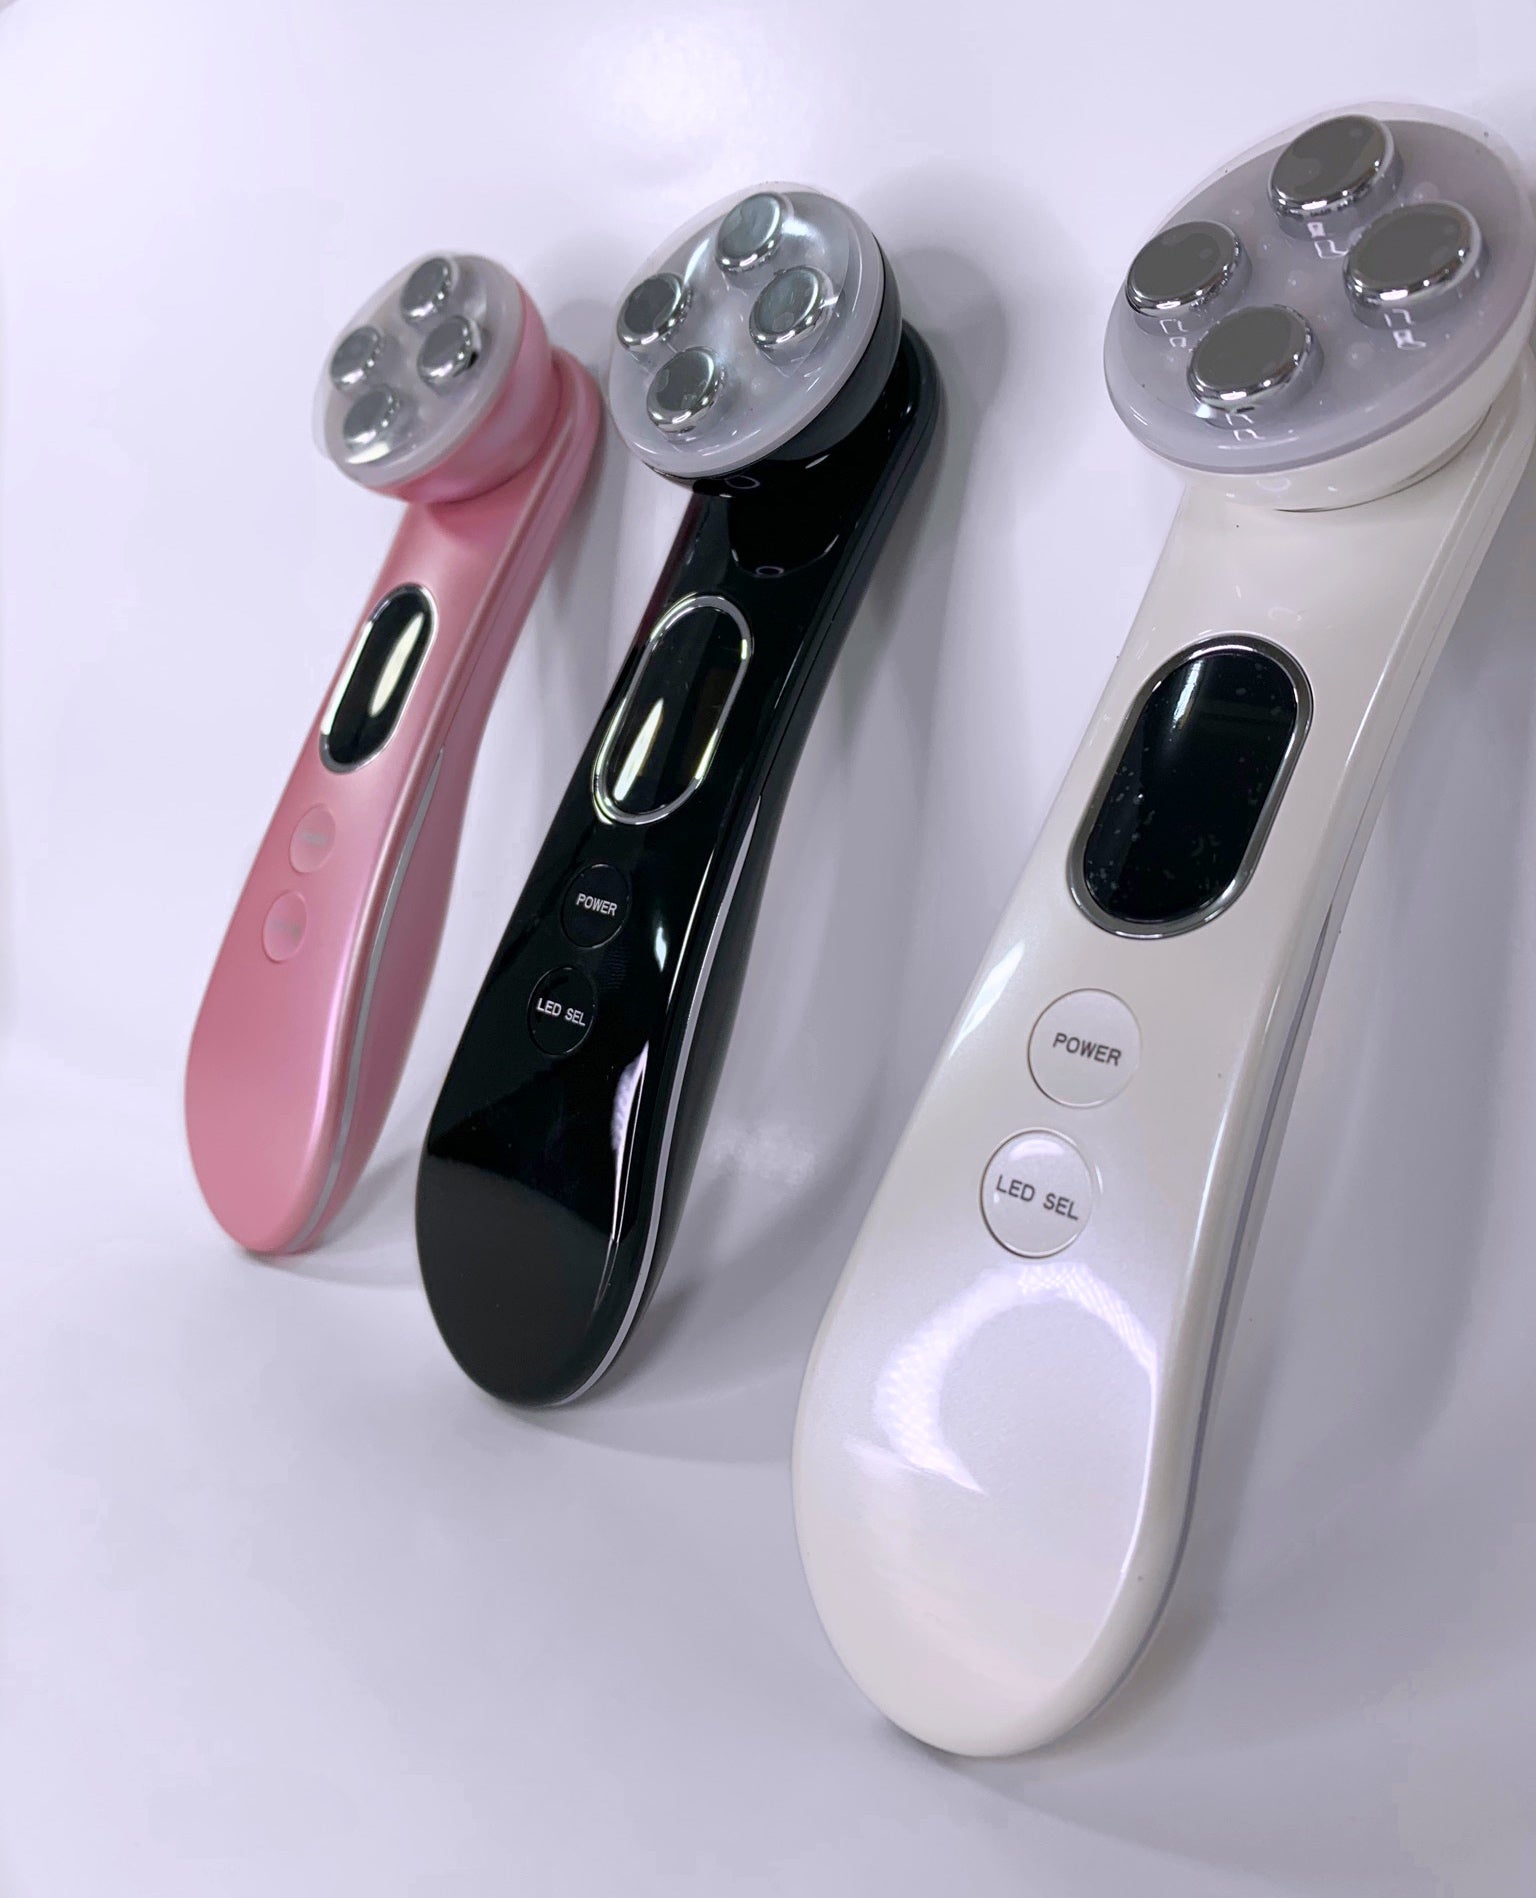 LED Light Therapy | Facial Massager